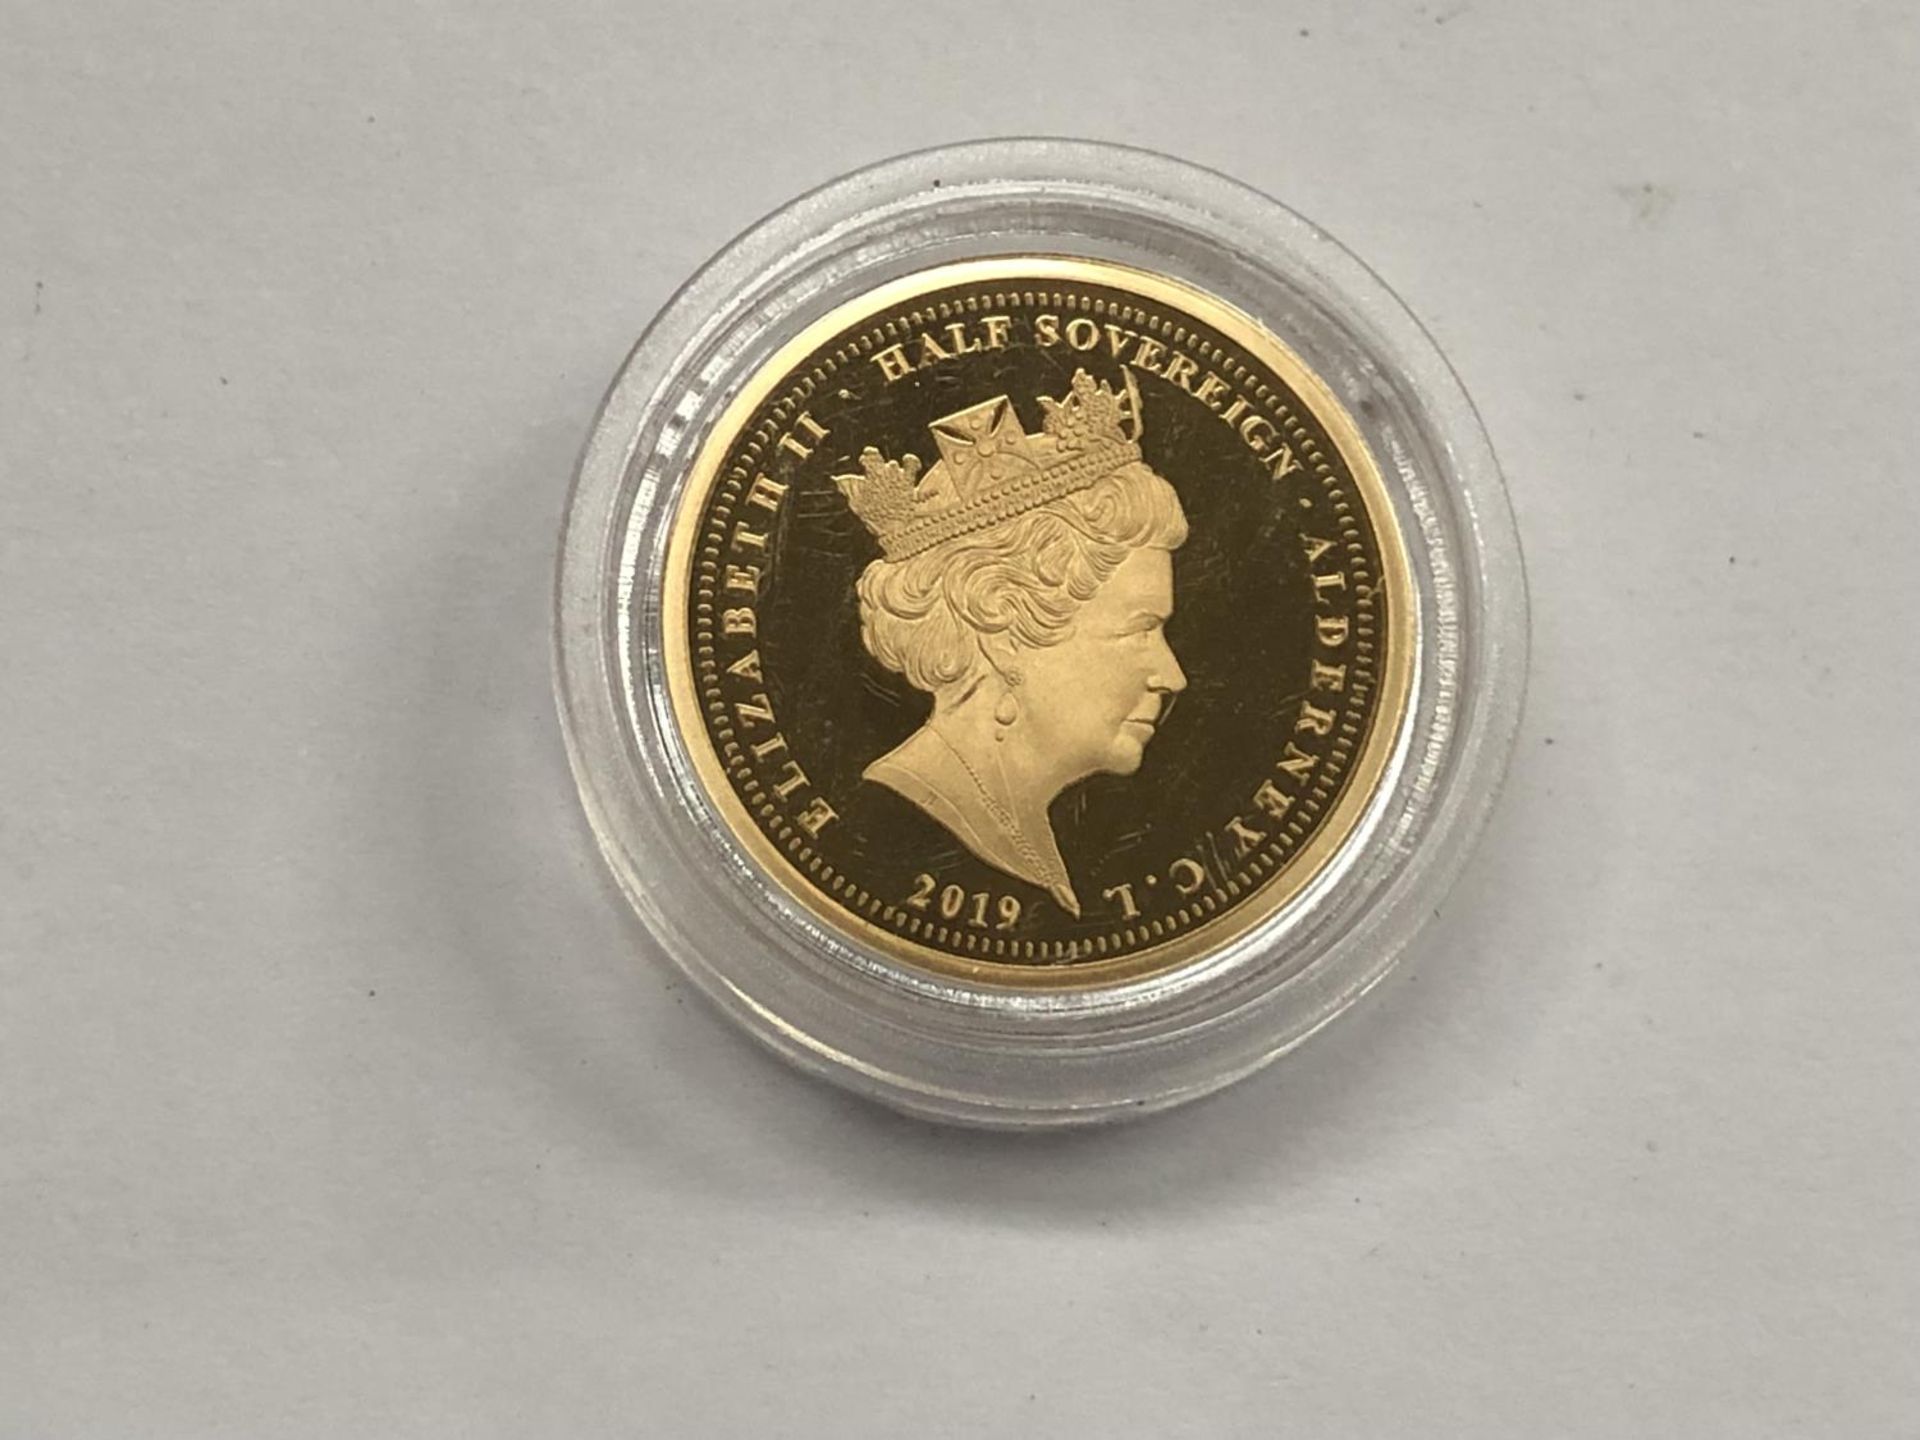 A D-DAY 75 1944-2019 22CT GOLD 1/2 SOVEREIGN - Image 2 of 2